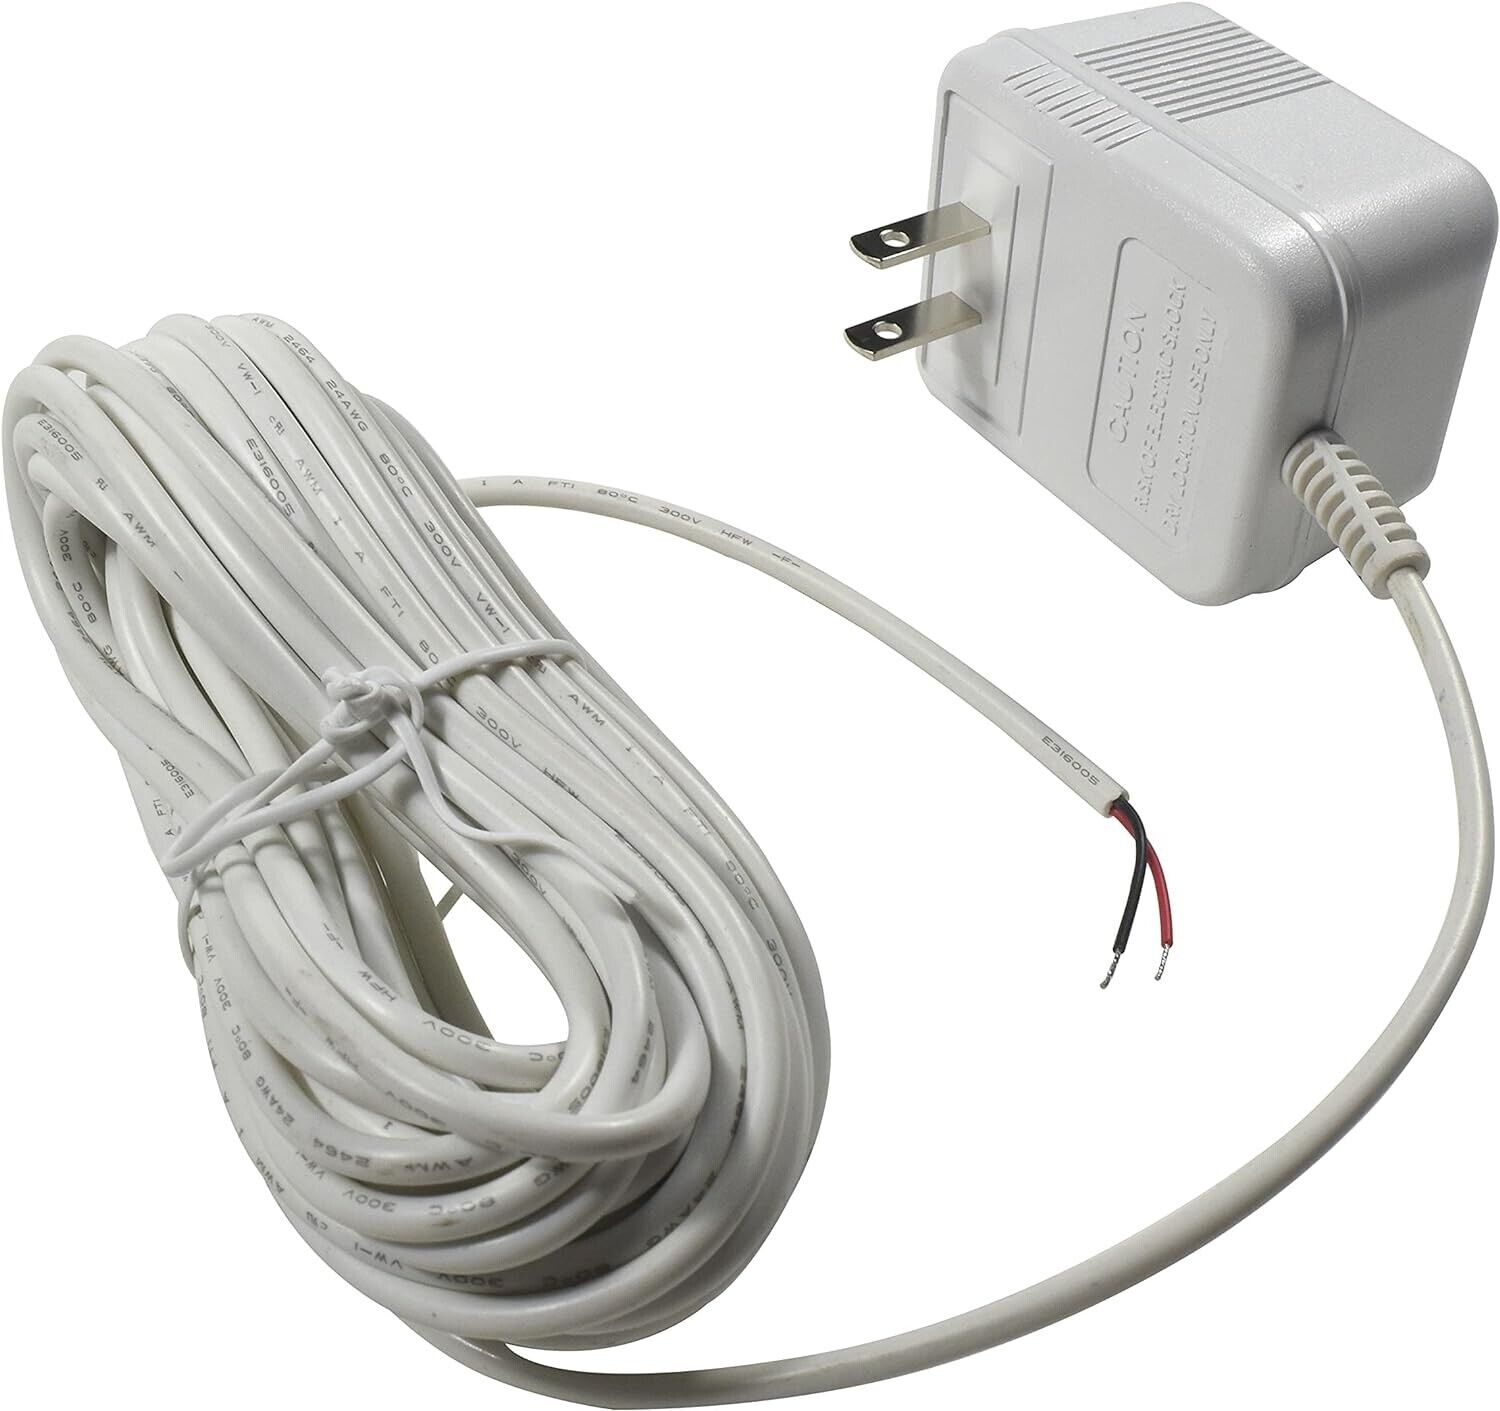 AC Adapter Transformer for Nest Ring Doorbell Thermostat C-Wire 25ft White Cable Input 120V AC Type Replacement AC Adap